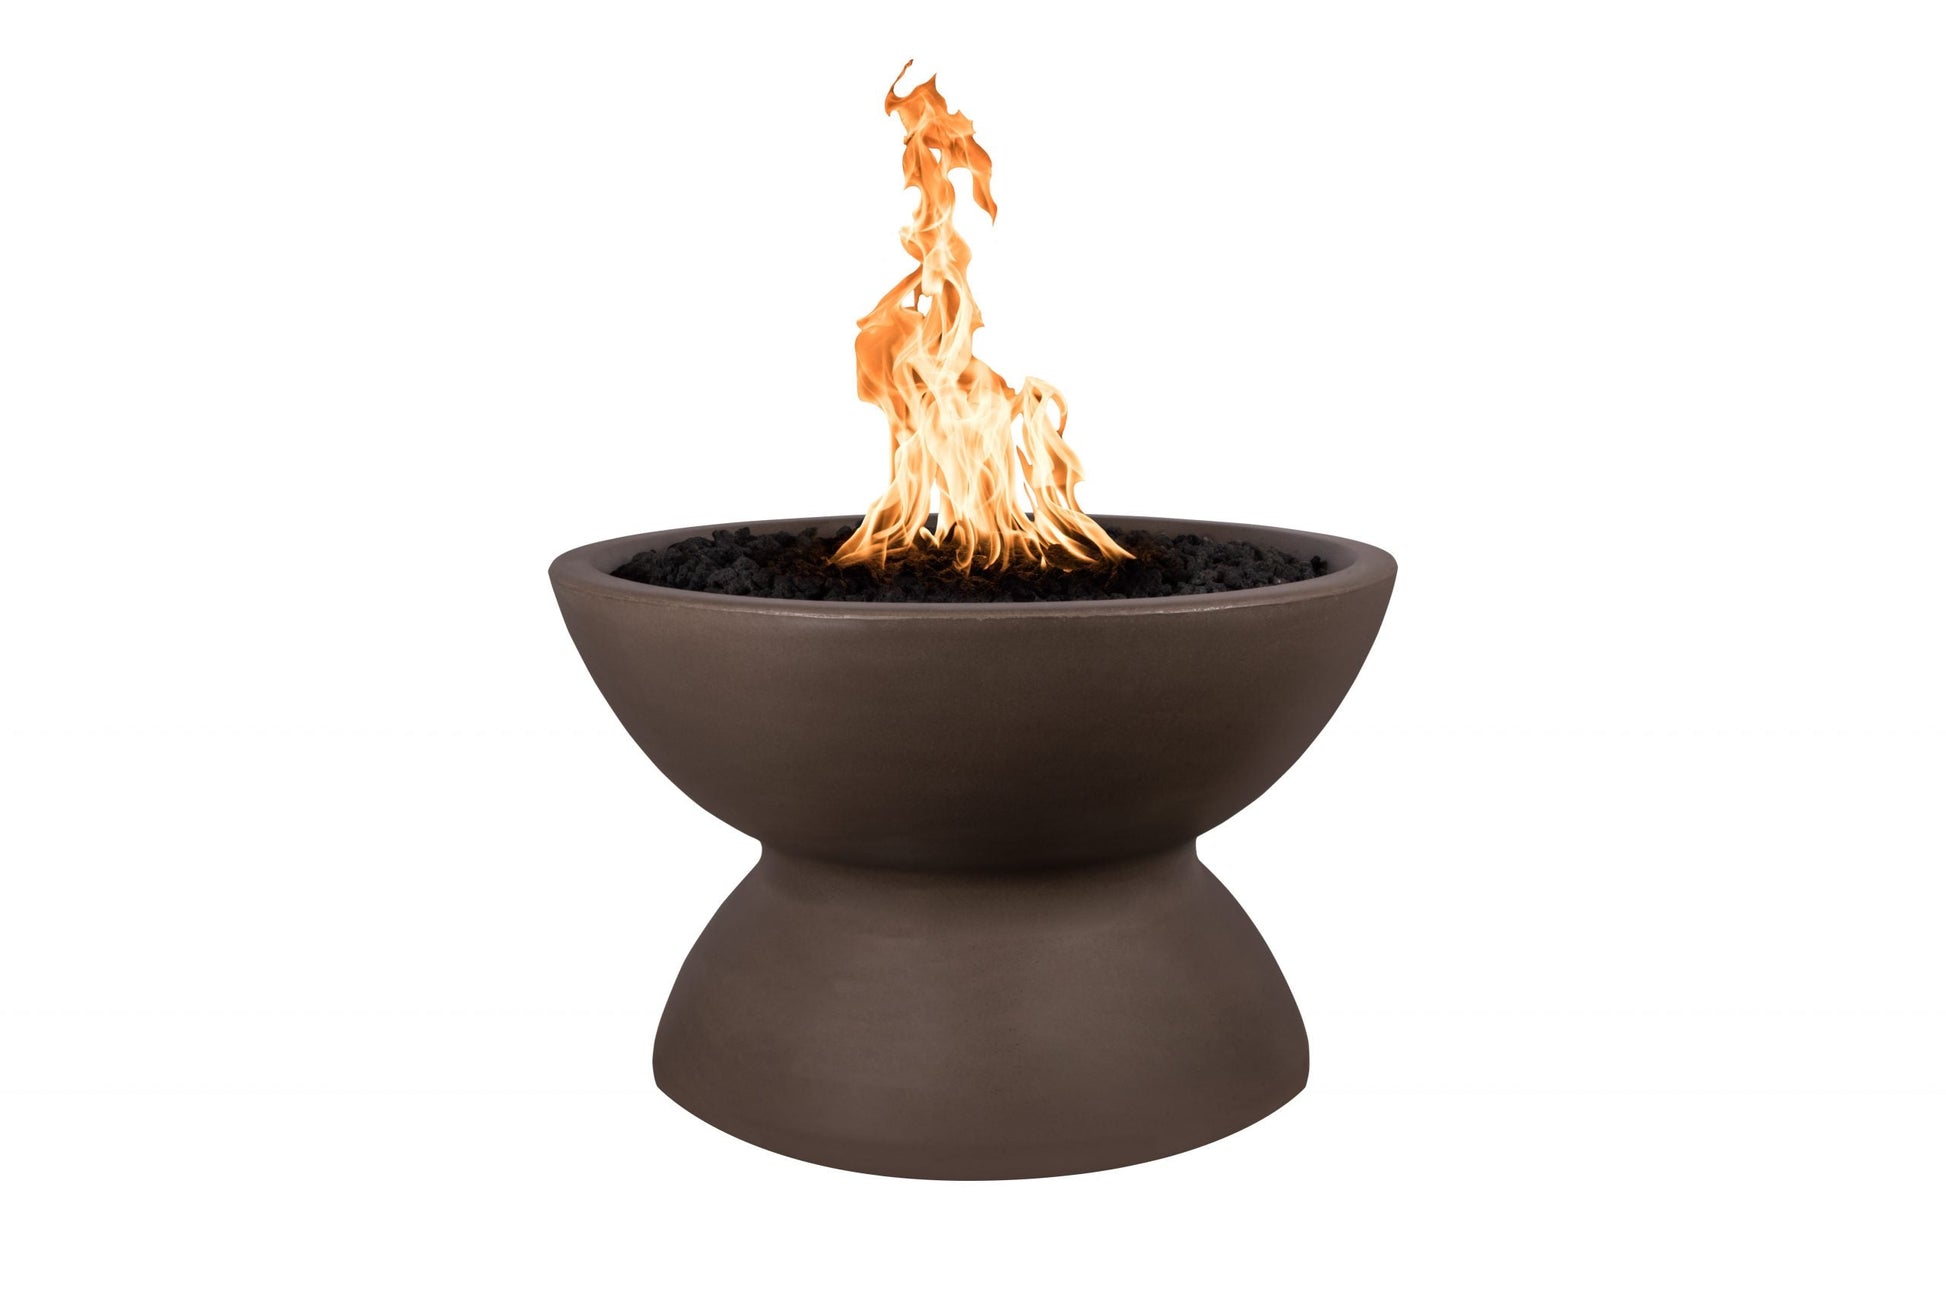 The Outdoor Plus Round Copa 33" Metallic Silver GFRC Concrete Liquid Propane Fire Pit with 12V Electronic Ignition